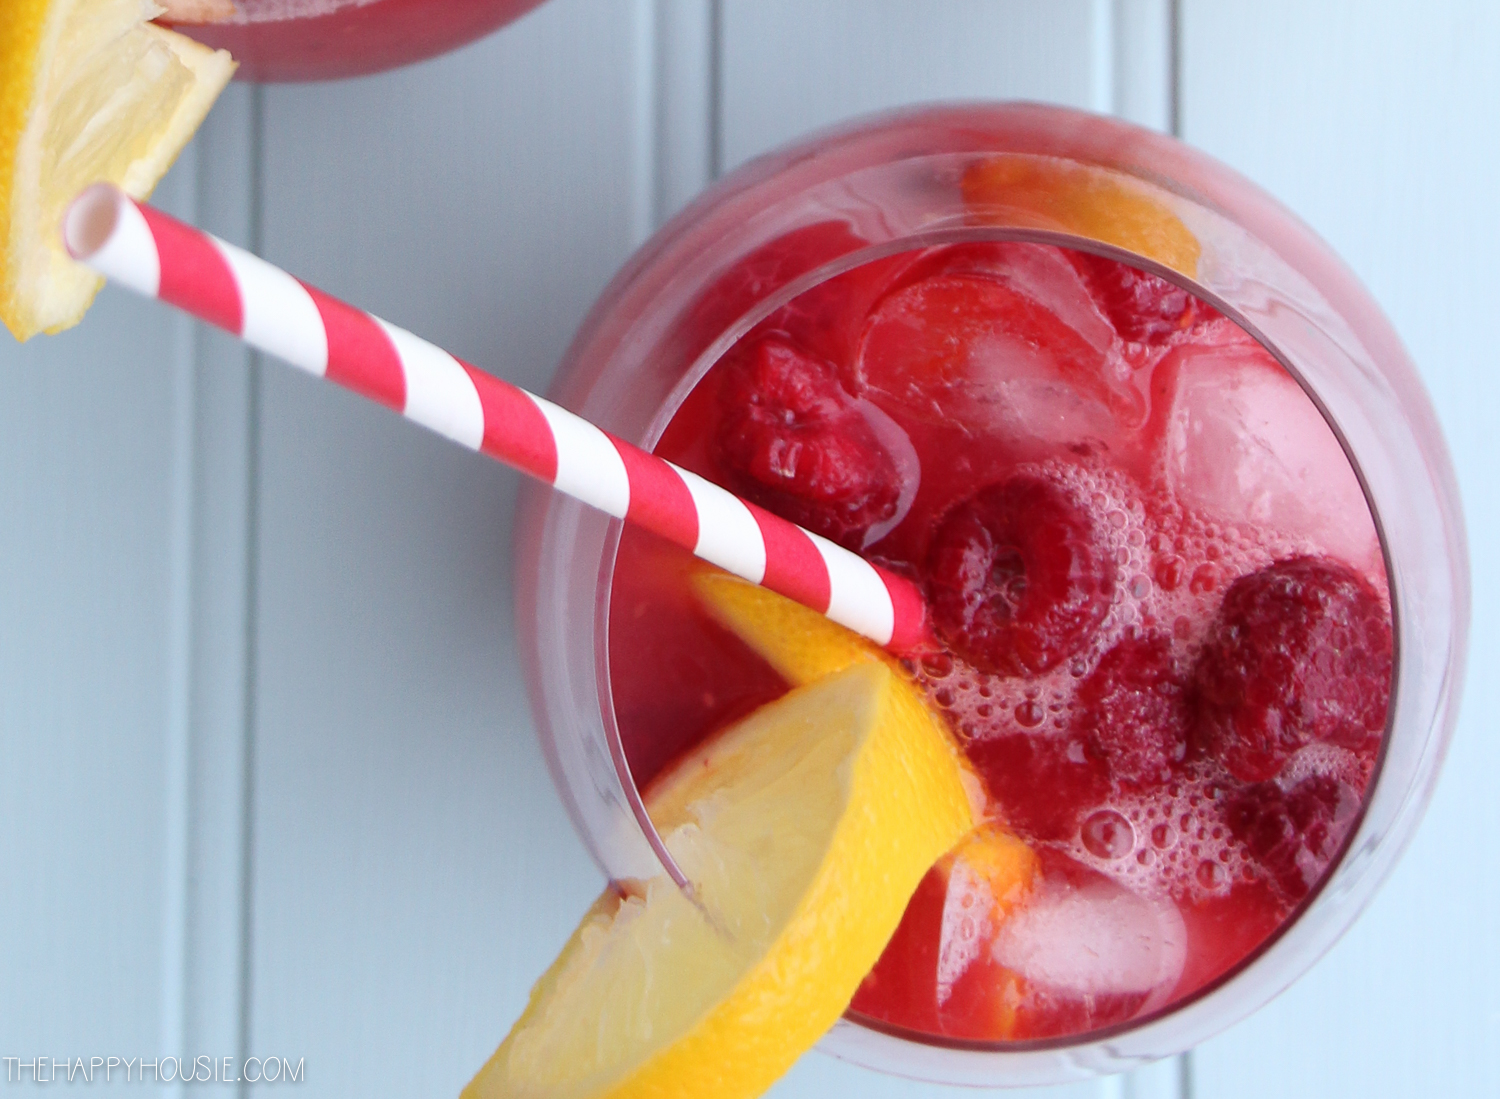 Up close view of the sangria.